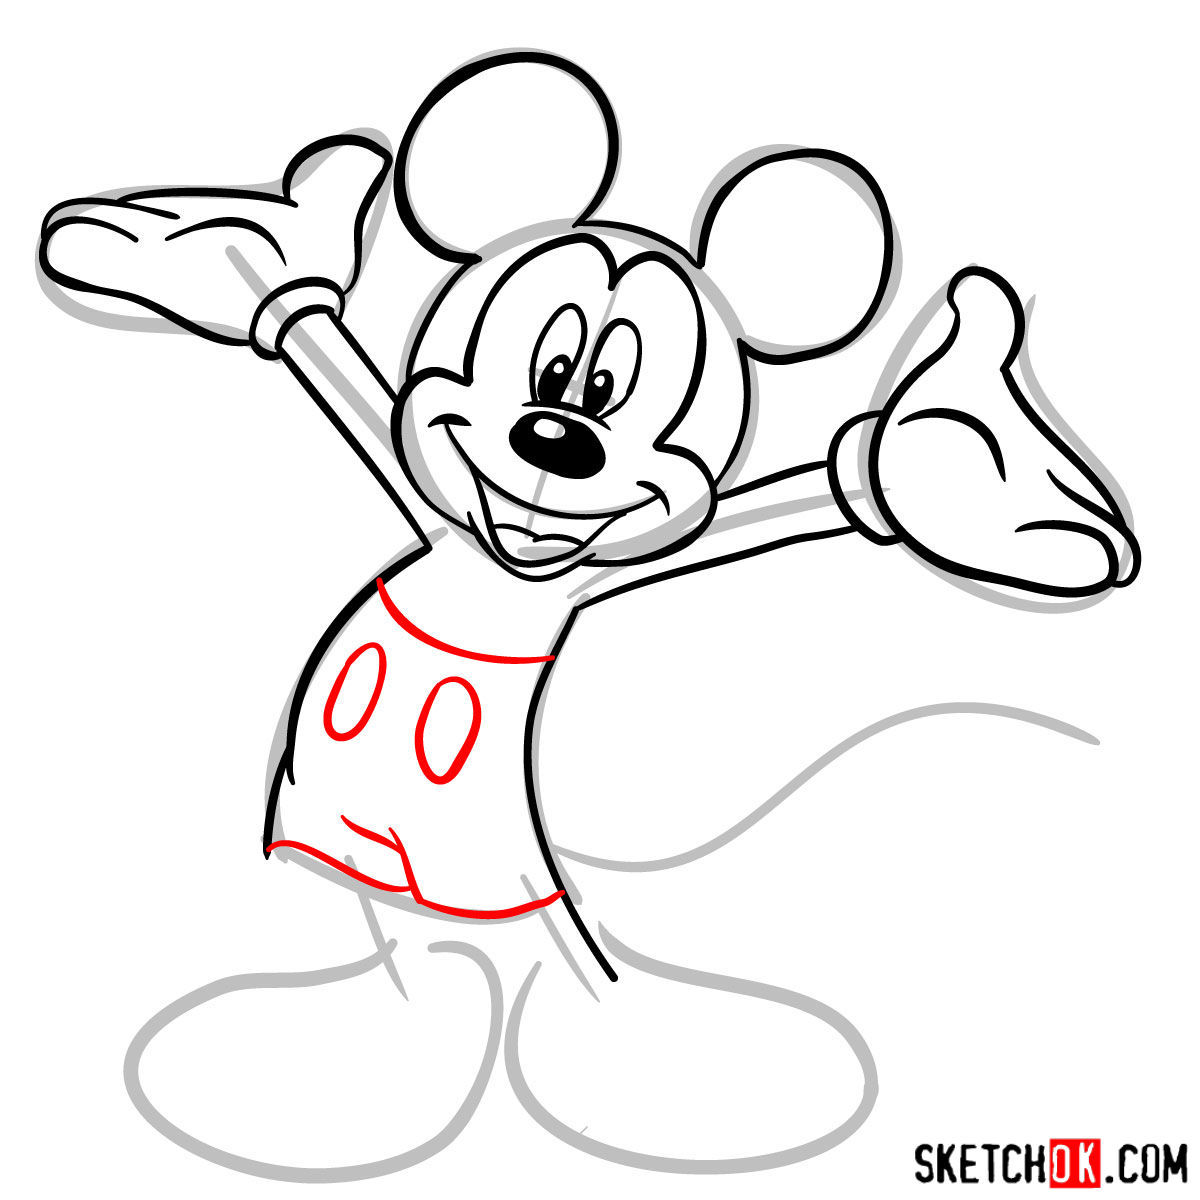 New Sketch Drawing Of Mickey Mouse 